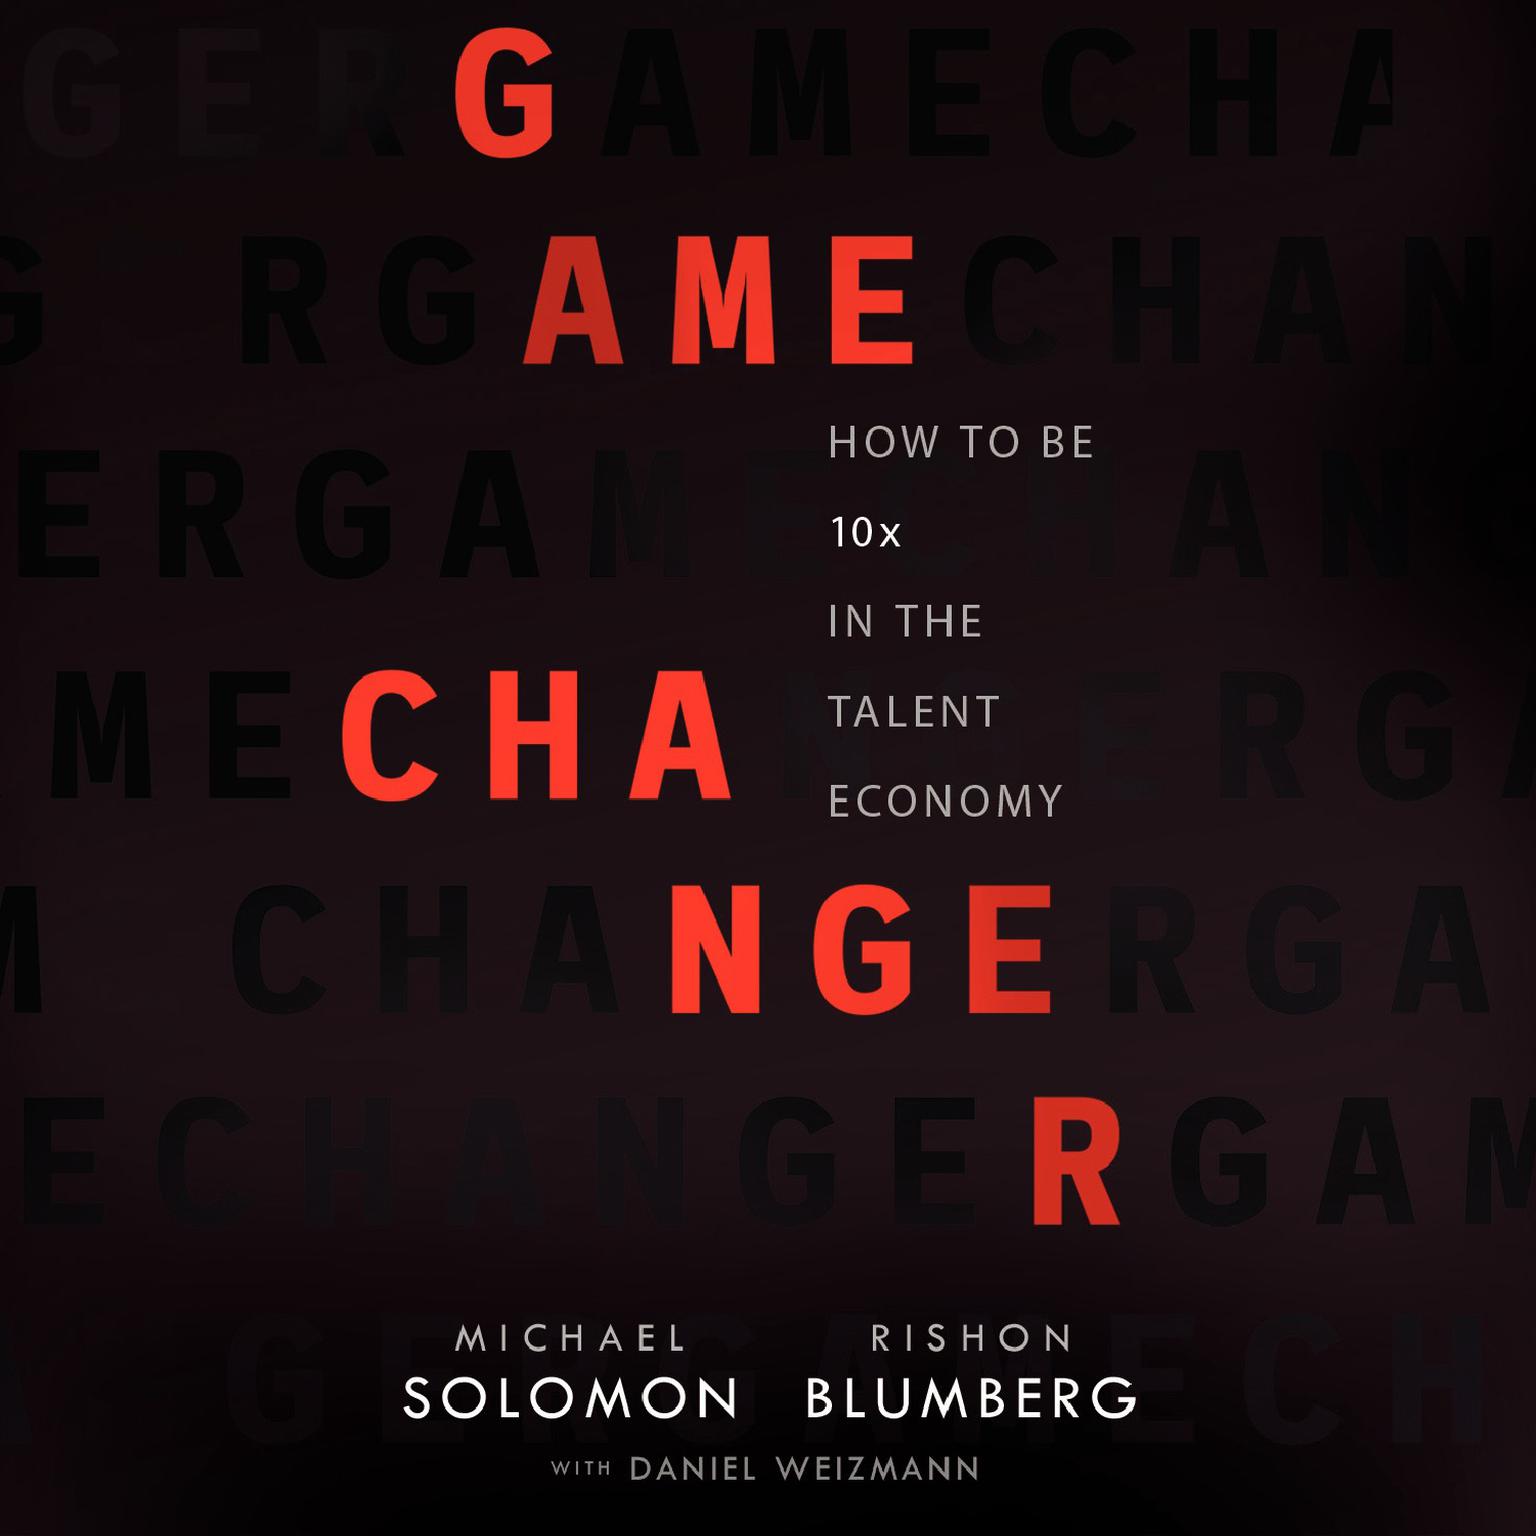 Game Changer: How to Be 10x in the Talent Economy Audiobook, by Michael Solomon